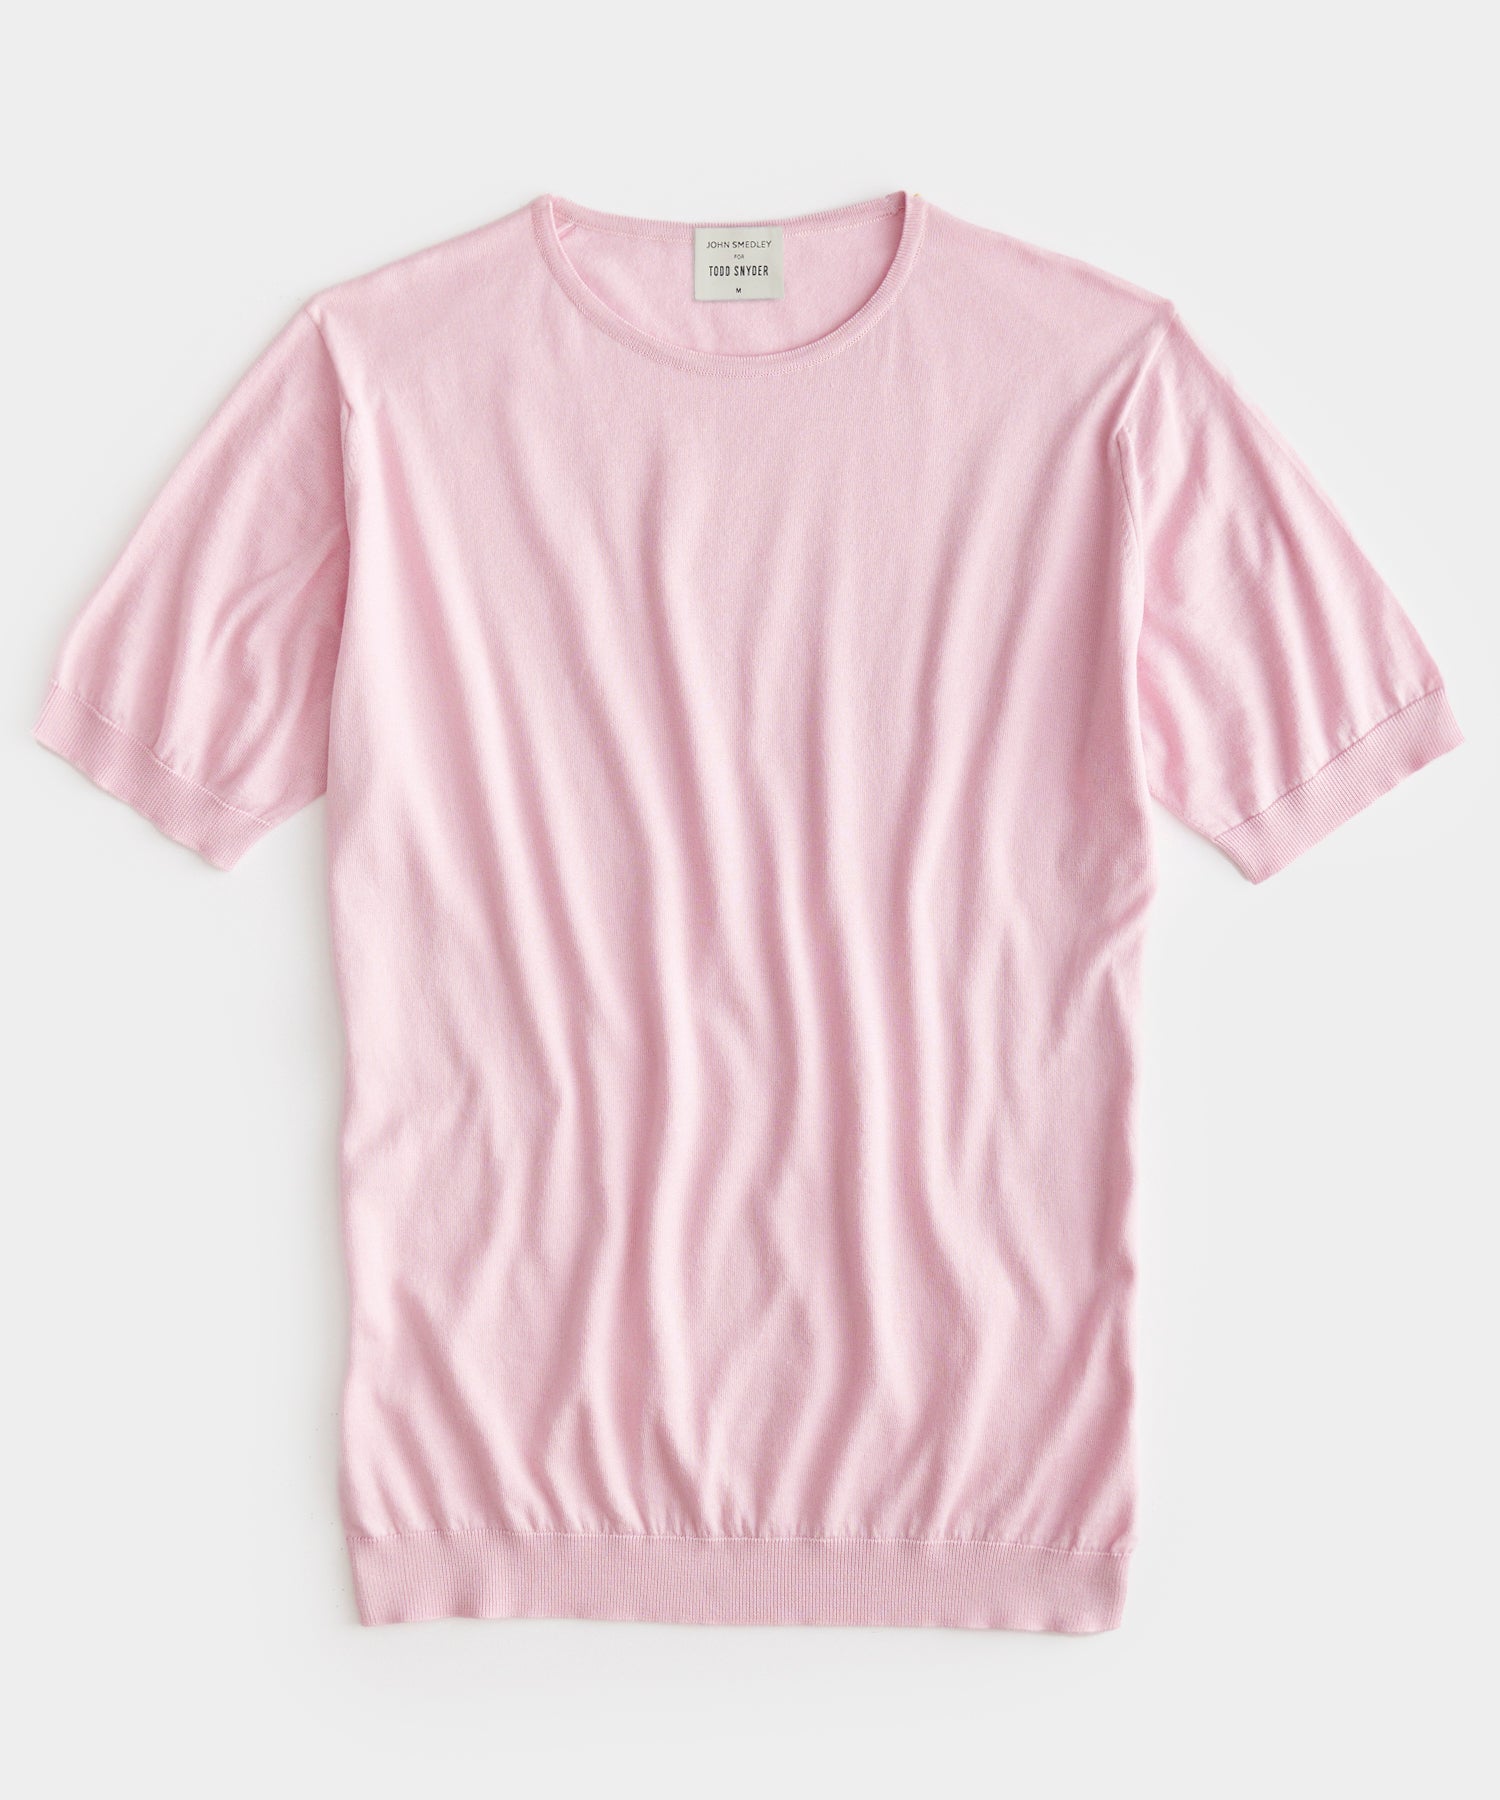 John Smedley x Todd Snyder Belden Tee In Shell Pink